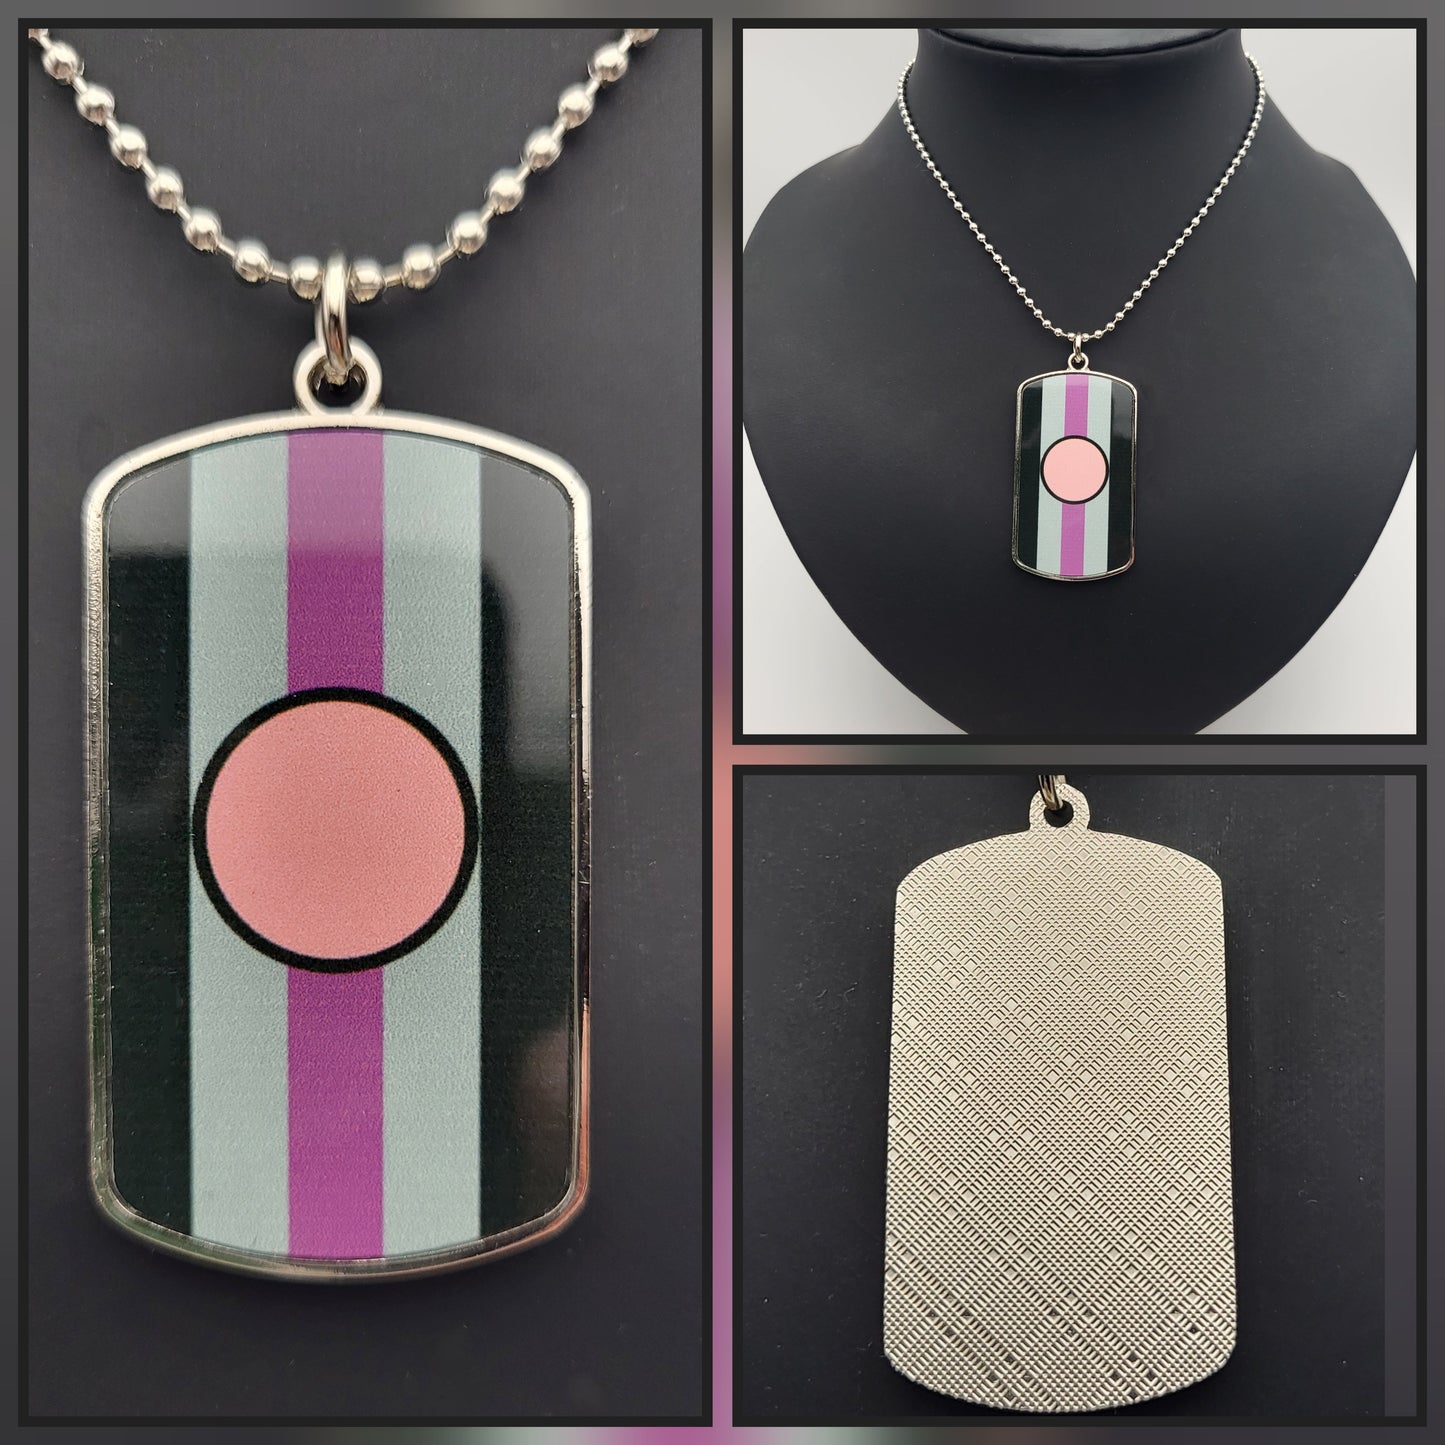 Aroace Pride Metal Dog Tag Pendant Necklace | Choose Your Flag | Choose Your Chain or Cord Necklace ninjaferretart